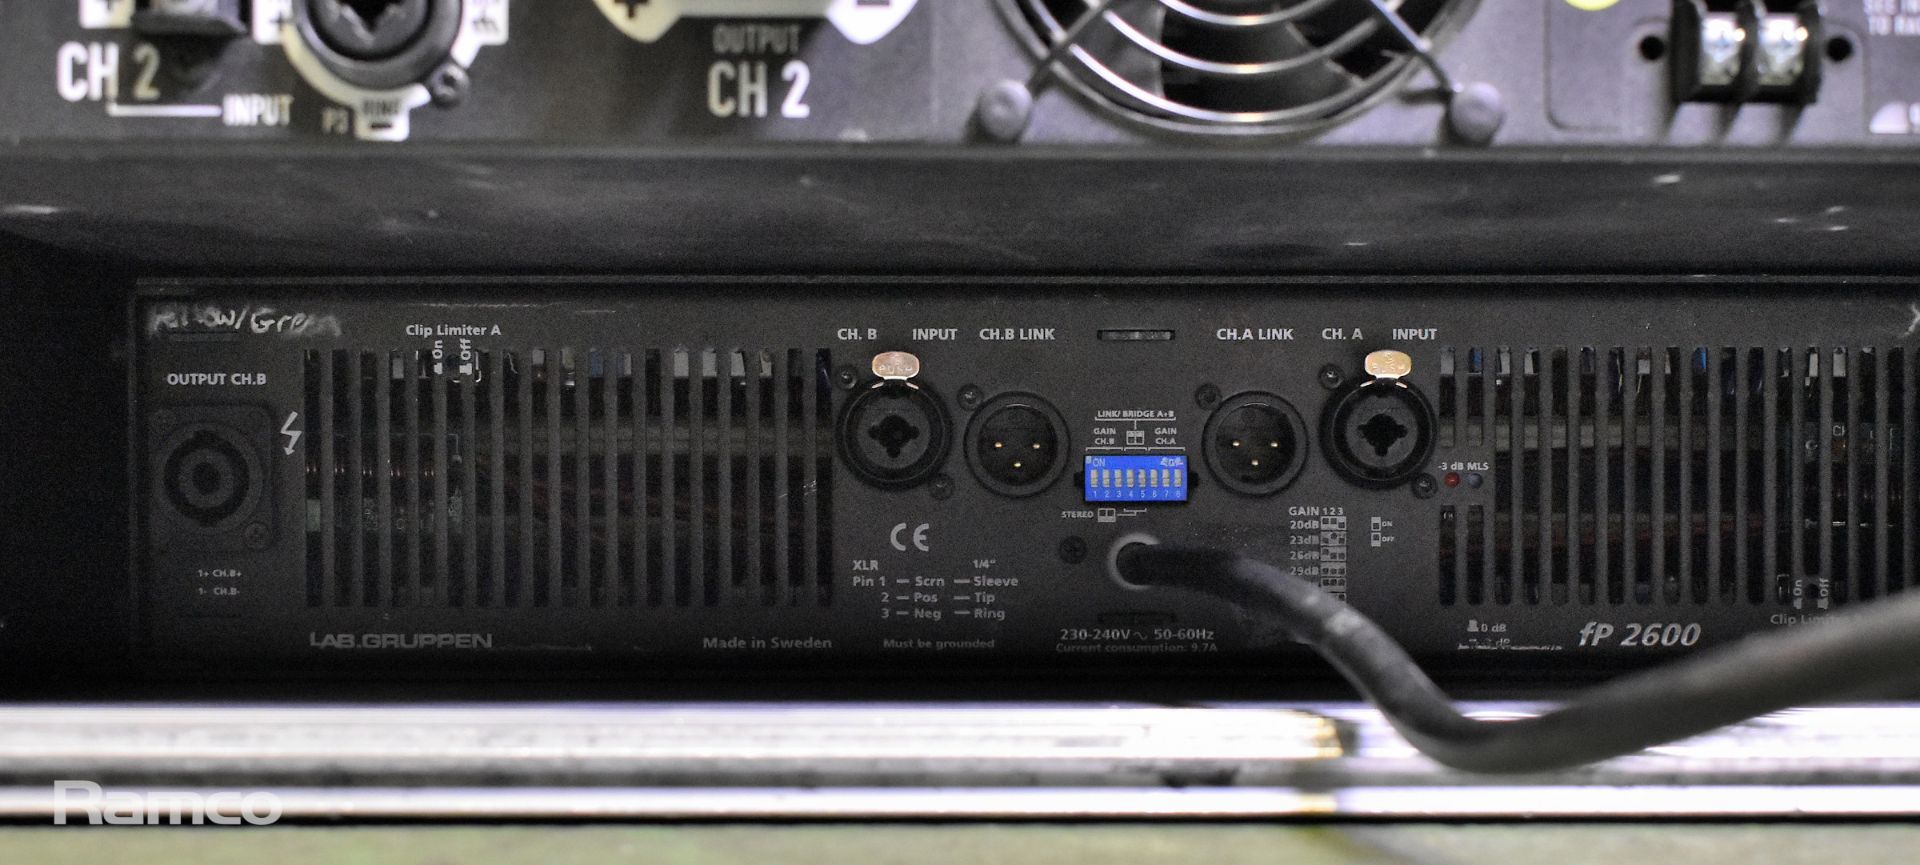 Lab Gruppen FP2600 amplifier and QSC Powerlight 1.4 amplifier in a flightcase - Image 6 of 7